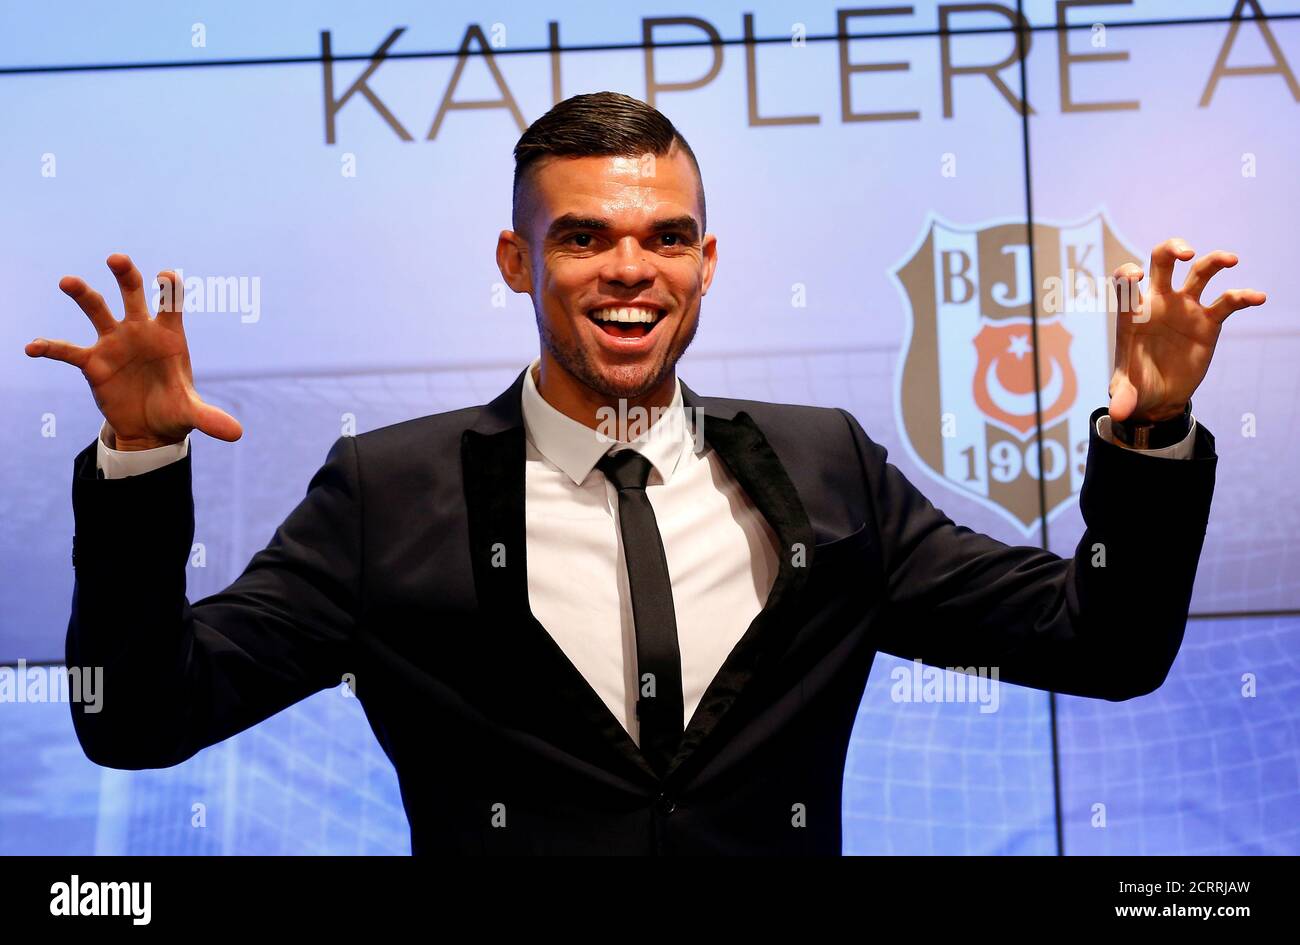 Pepe, 34-year-old Brazilian-born defender, reacts during a signing ceremony with Turkish soccer club Besiktas in Istanbul, Turkey July 5, 2017. REUTERS/Murad Sezer Stock Photo